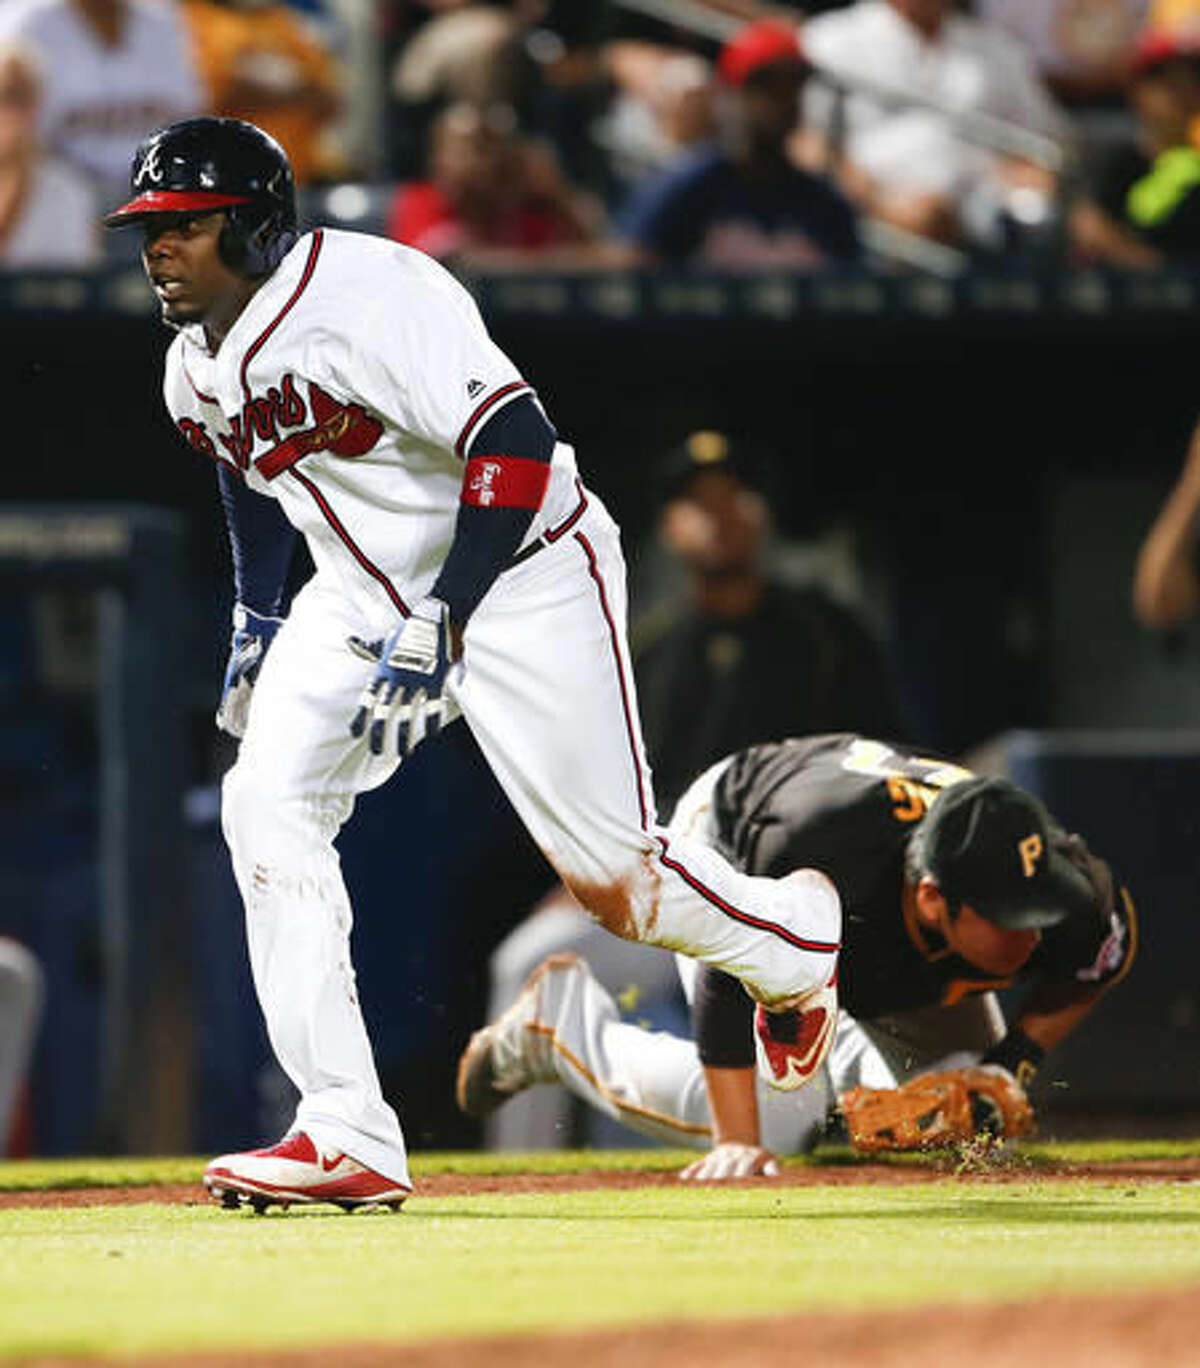 Atlanta Braves' Adonis Garcia races home to score as the ball gets away from Pittsburgh Pirates third baseman Jung Ho Kang after Garcia took third during the seventh inning of a baseball game Thursday, Aug. 4, 2016, in Atlanta. Kang was charged with an error on the play. (AP Photo/John Bazemore)